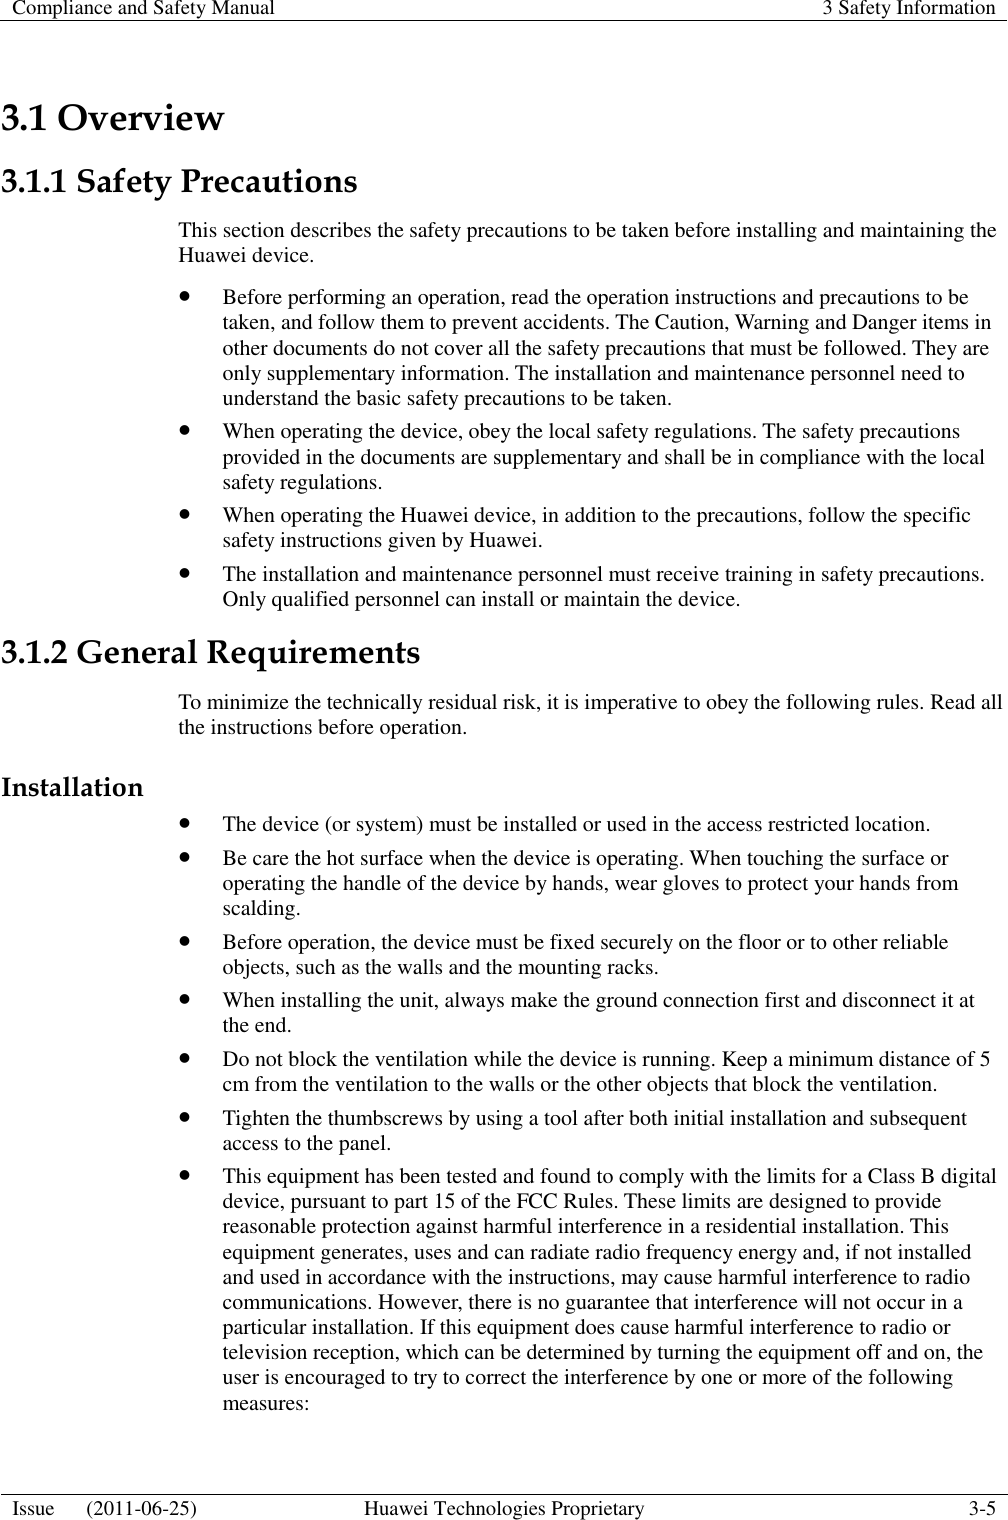 Compliance and Safety Manual 3 Safety Information  Issue      (2011-06-25) Huawei Technologies Proprietary 3-5  3.1 Overview 3.1.1 Safety Precautions This section describes the safety precautions to be taken before installing and maintaining the Huawei device.  Before performing an operation, read the operation instructions and precautions to be taken, and follow them to prevent accidents. The Caution, Warning and Danger items in other documents do not cover all the safety precautions that must be followed. They are only supplementary information. The installation and maintenance personnel need to understand the basic safety precautions to be taken.  When operating the device, obey the local safety regulations. The safety precautions provided in the documents are supplementary and shall be in compliance with the local safety regulations.  When operating the Huawei device, in addition to the precautions, follow the specific safety instructions given by Huawei.  The installation and maintenance personnel must receive training in safety precautions. Only qualified personnel can install or maintain the device. 3.1.2 General Requirements To minimize the technically residual risk, it is imperative to obey the following rules. Read all the instructions before operation. Installation  The device (or system) must be installed or used in the access restricted location.  Be care the hot surface when the device is operating. When touching the surface or operating the handle of the device by hands, wear gloves to protect your hands from scalding.  Before operation, the device must be fixed securely on the floor or to other reliable objects, such as the walls and the mounting racks.  When installing the unit, always make the ground connection first and disconnect it at the end.  Do not block the ventilation while the device is running. Keep a minimum distance of 5 cm from the ventilation to the walls or the other objects that block the ventilation.  Tighten the thumbscrews by using a tool after both initial installation and subsequent access to the panel.  This equipment has been tested and found to comply with the limits for a Class B digital device, pursuant to part 15 of the FCC Rules. These limits are designed to provide reasonable protection against harmful interference in a residential installation. This equipment generates, uses and can radiate radio frequency energy and, if not installed and used in accordance with the instructions, may cause harmful interference to radio communications. However, there is no guarantee that interference will not occur in a particular installation. If this equipment does cause harmful interference to radio or television reception, which can be determined by turning the equipment off and on, the user is encouraged to try to correct the interference by one or more of the following measures: 